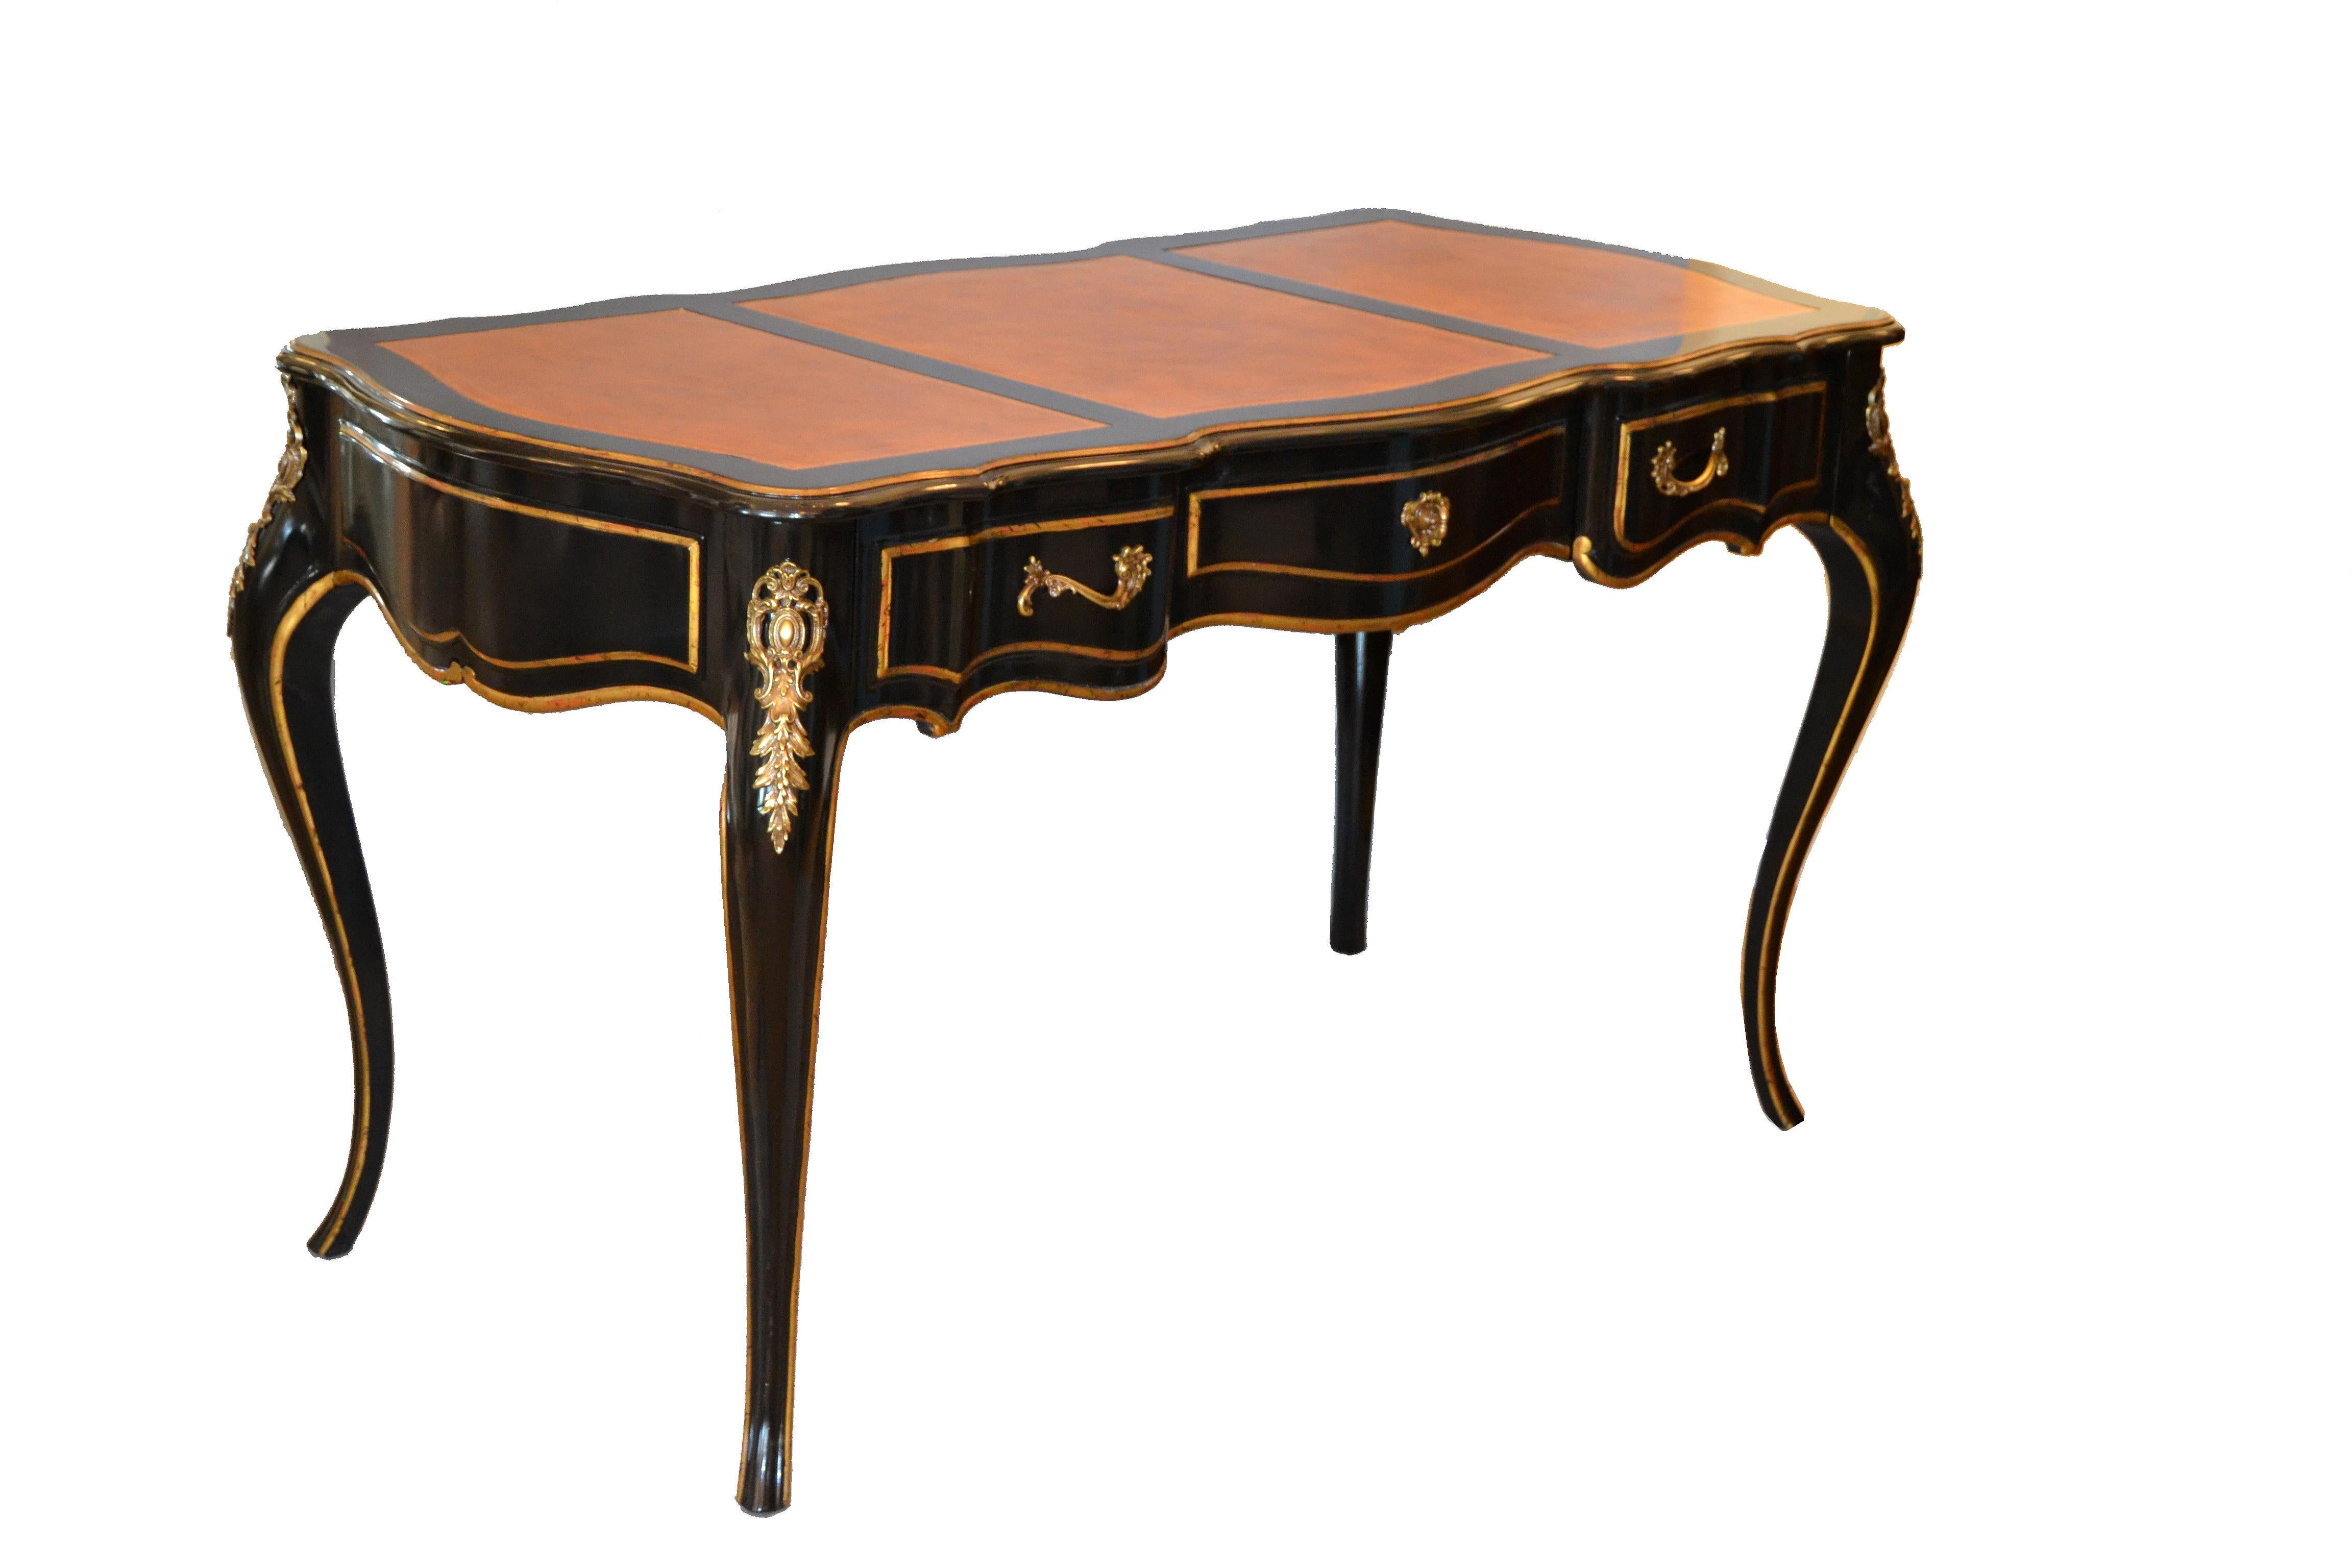 Graceful writing desk by Drexel in ebonized wood and a light brown three part leather top.
In the style of Louis XV, comes with matching stool.
Features three dovetailed drawers with pencil trays and bronze hardware.
Marked inside the drawer.
 